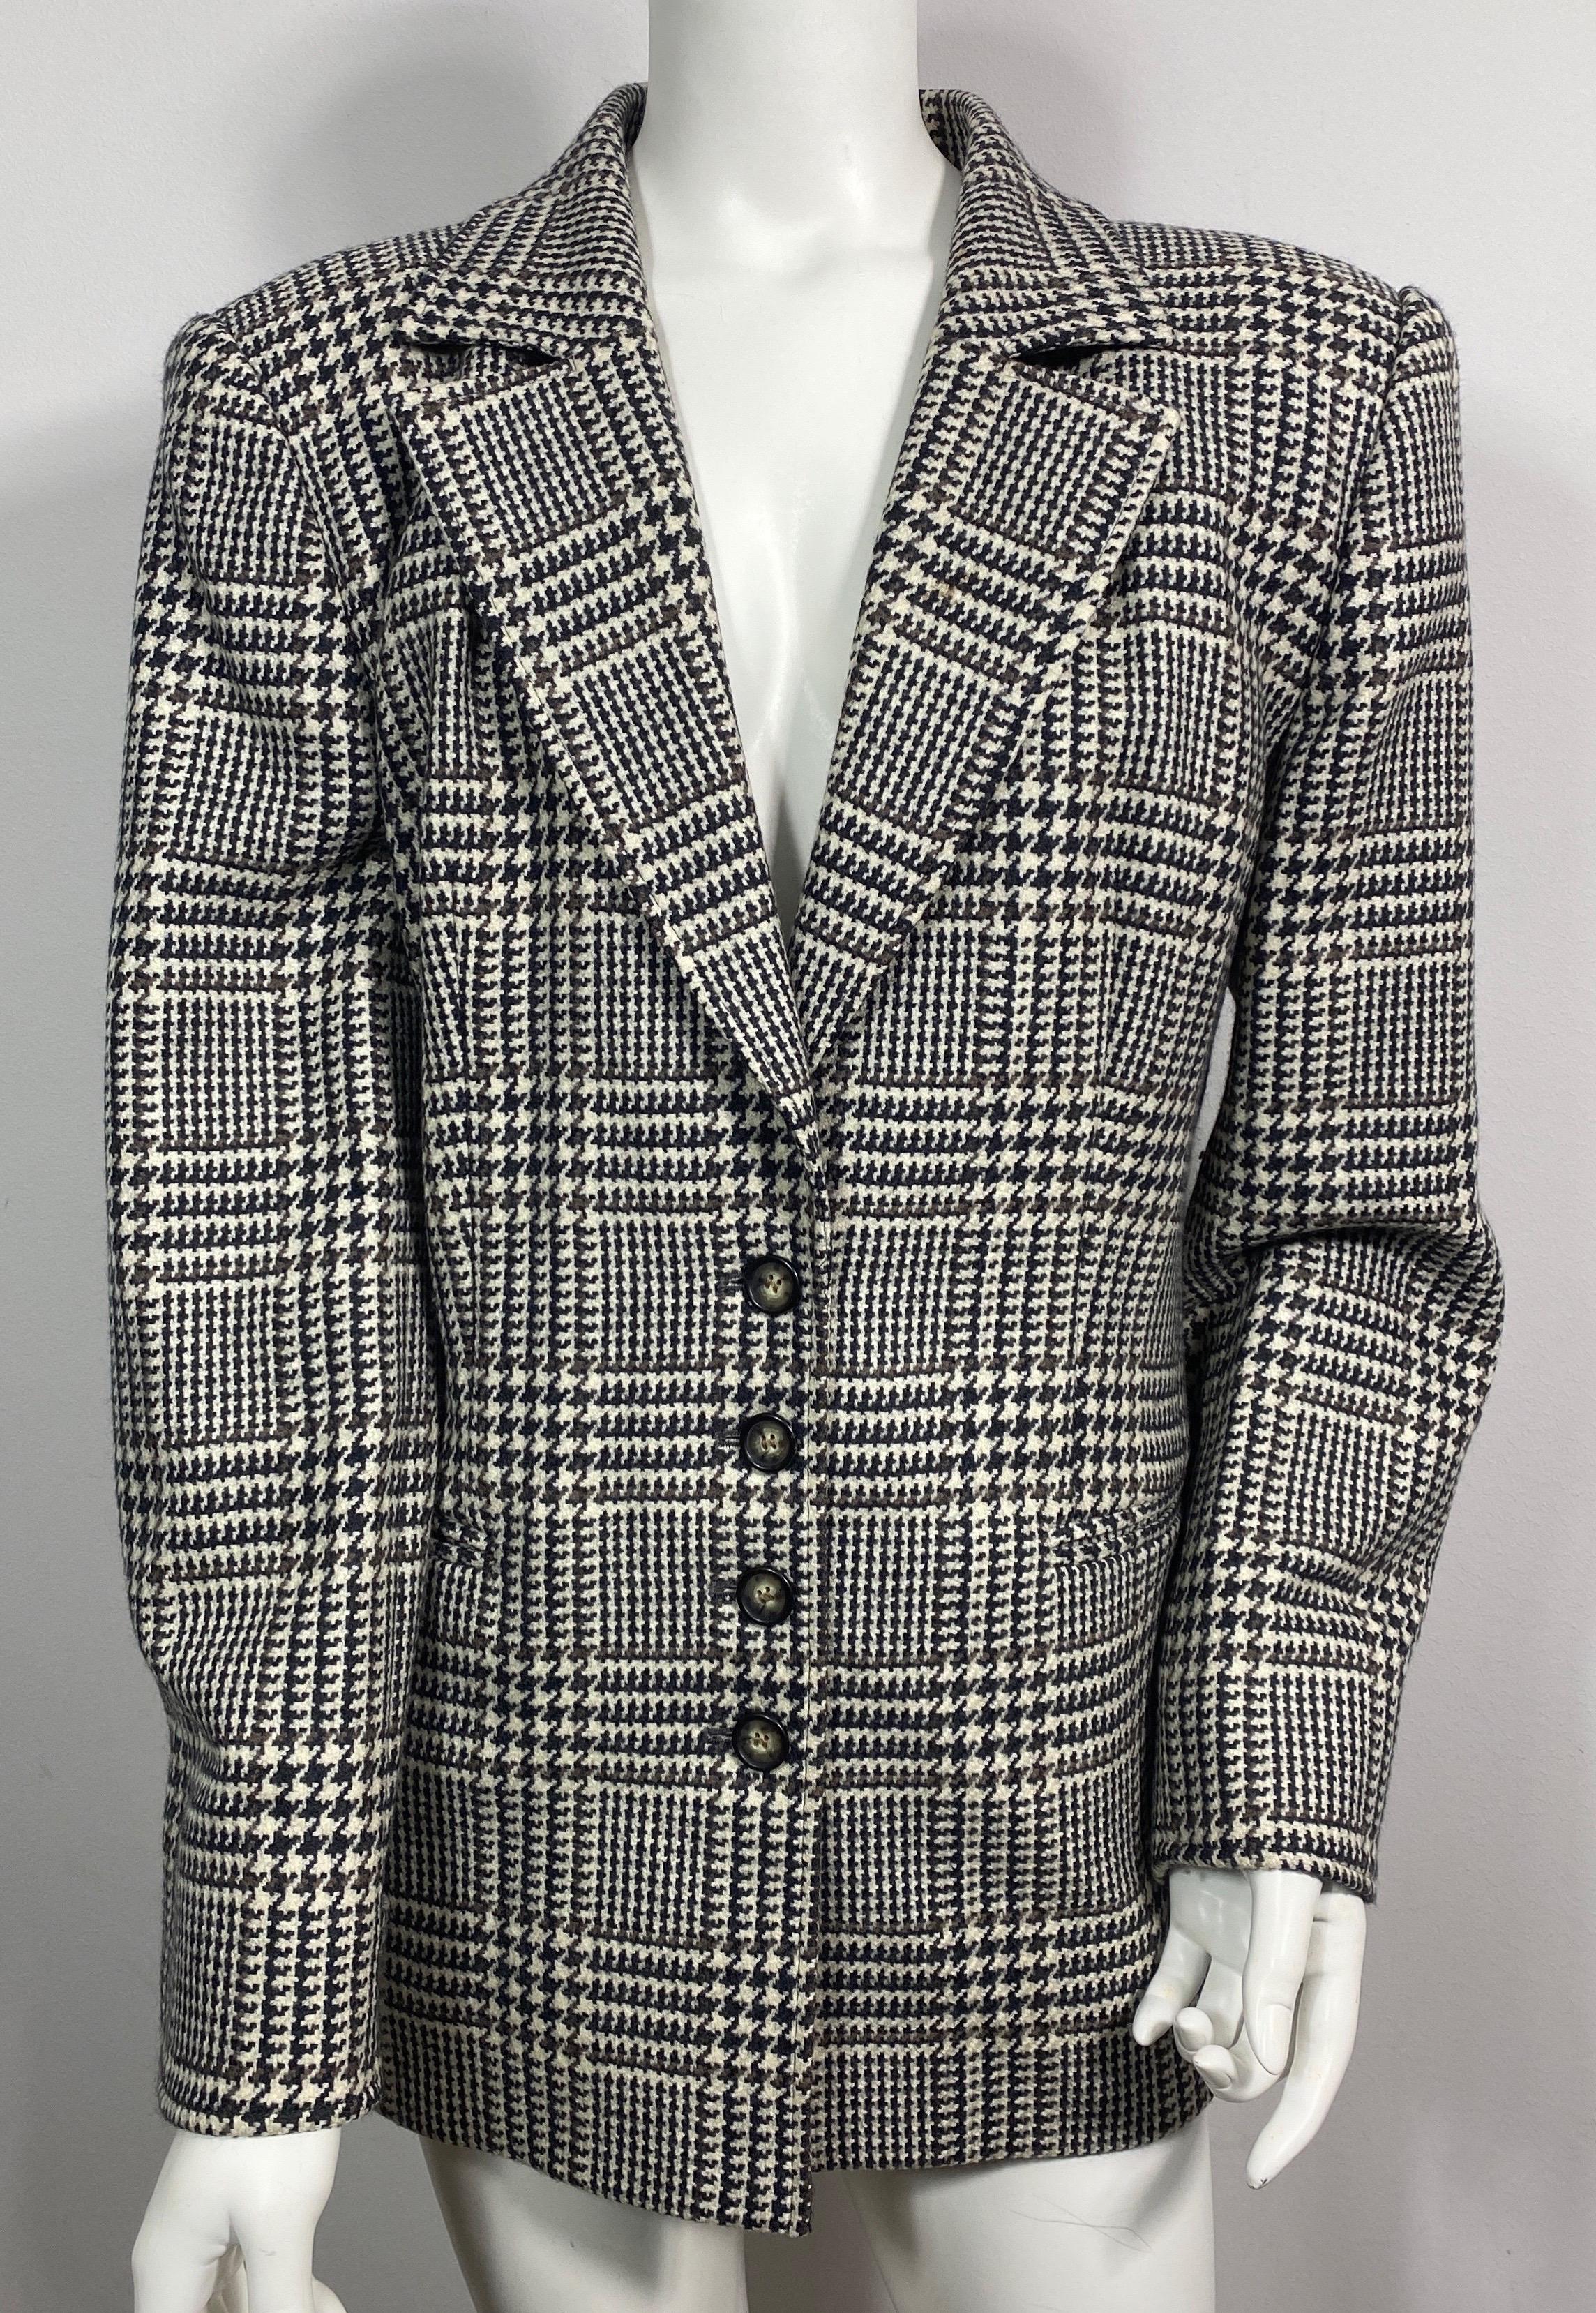 Gucci Houndstooth 1980’s Wool Blazer Jacket-Size 48 This 80’s houndstooth patterned throwback blazer is made from a very soft wool which almost feels like cashmere, 4 front buttons, 2 functioning slit pockets, 1 button with a partial cuff detail